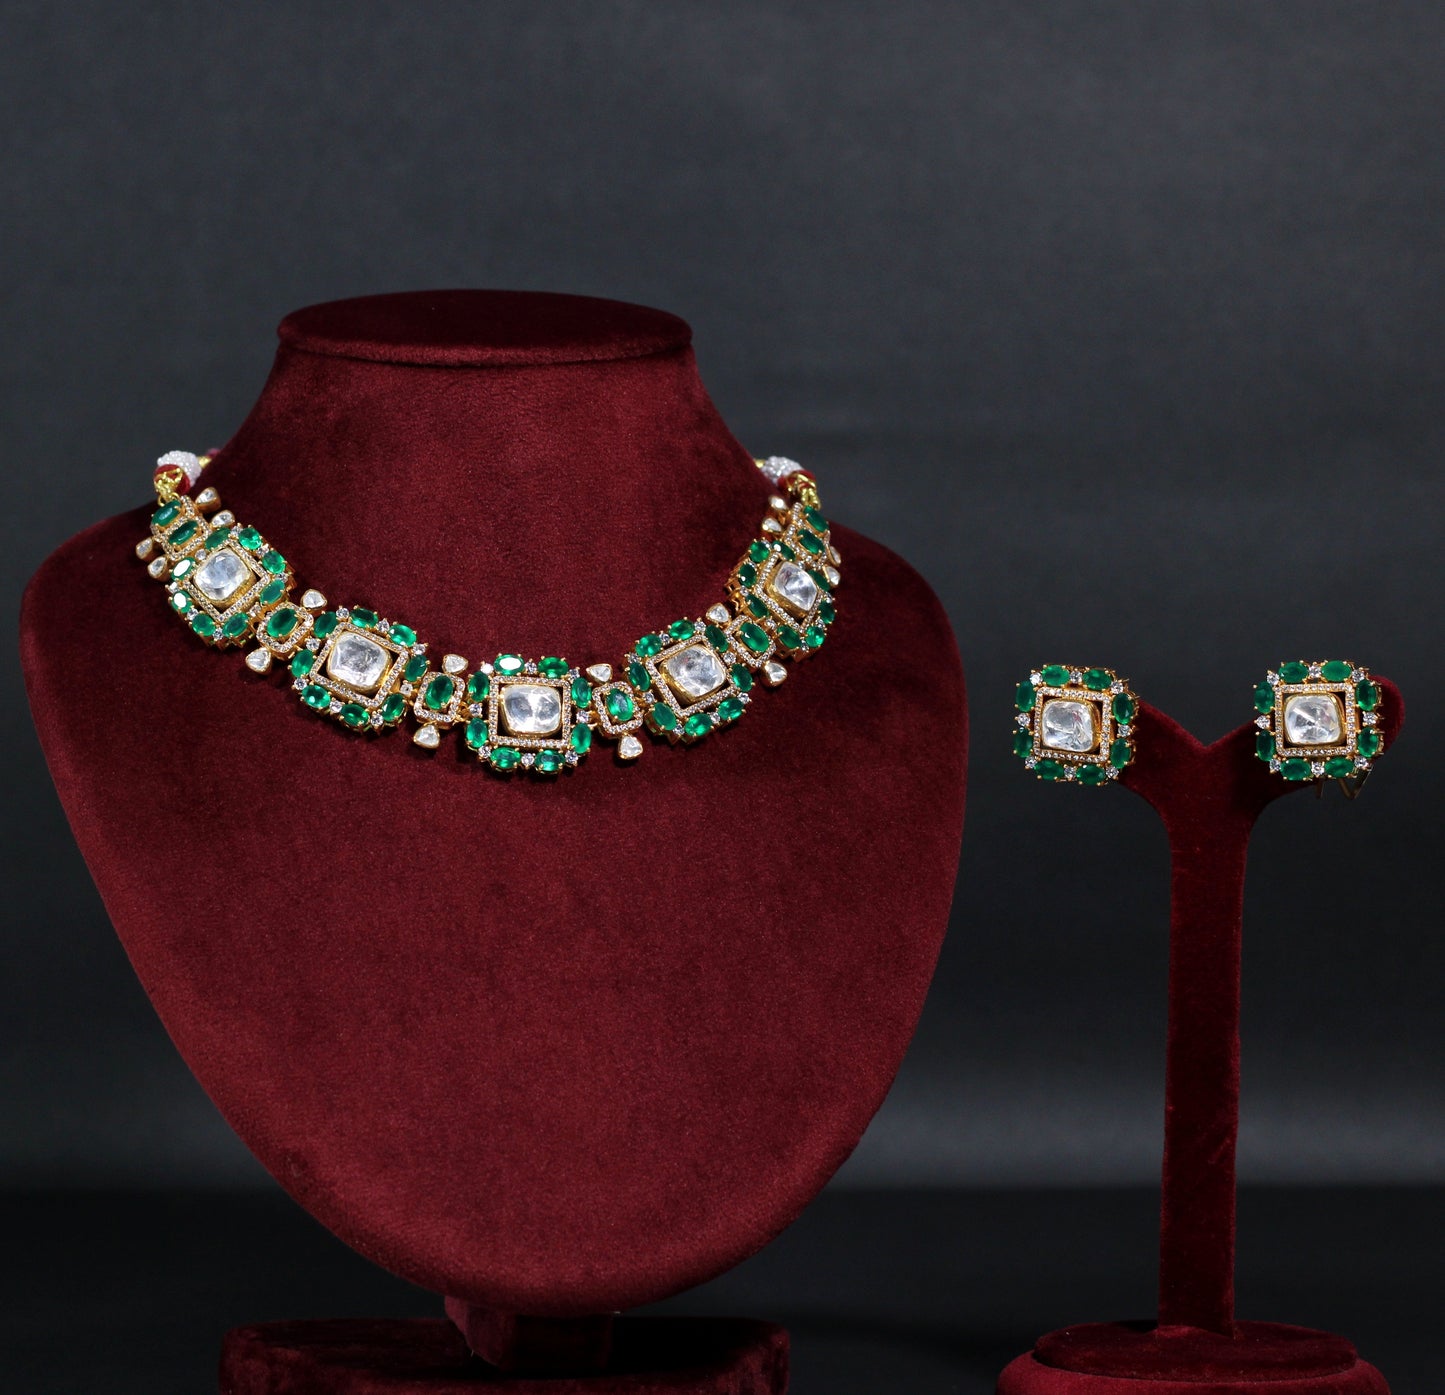 NECKLACE AND EARRING IN 92.5 STERLING SILVER IN 18KT GOLD PLATED WITH moissanite POLKI AND GREEN ONYX WITH ZIRCONIA